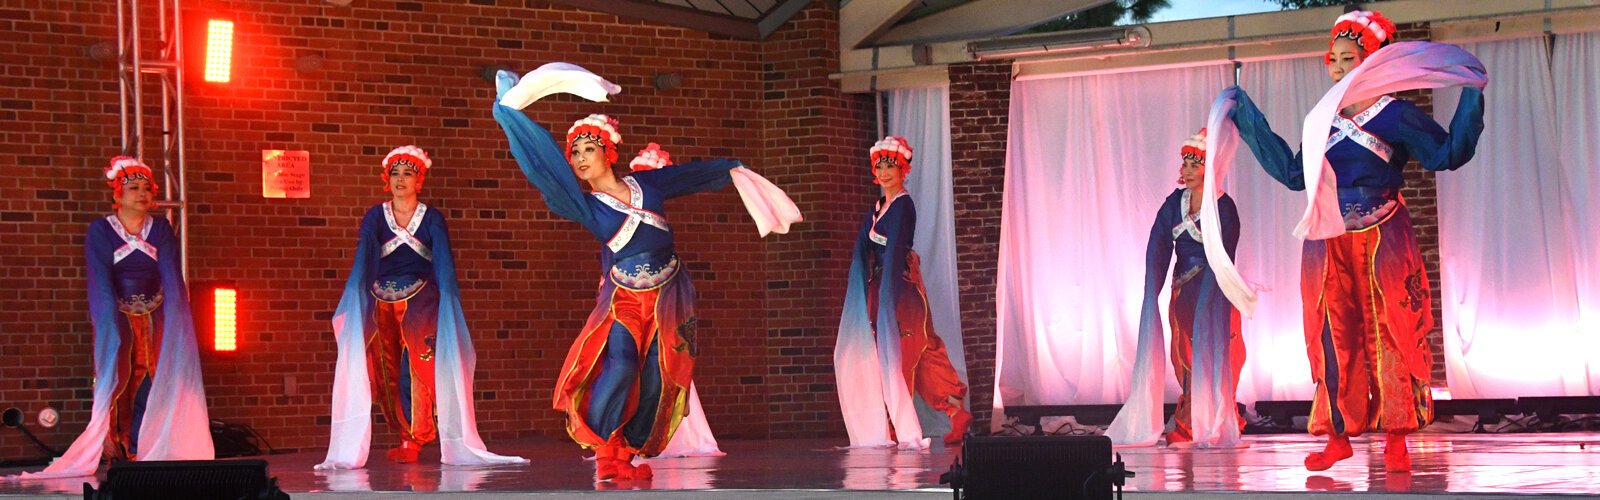 Chinese dancers of the Sunshine Dance Group perform “Deep Night," a tale of older Asian ladies dreaming of a better life in ancient China.